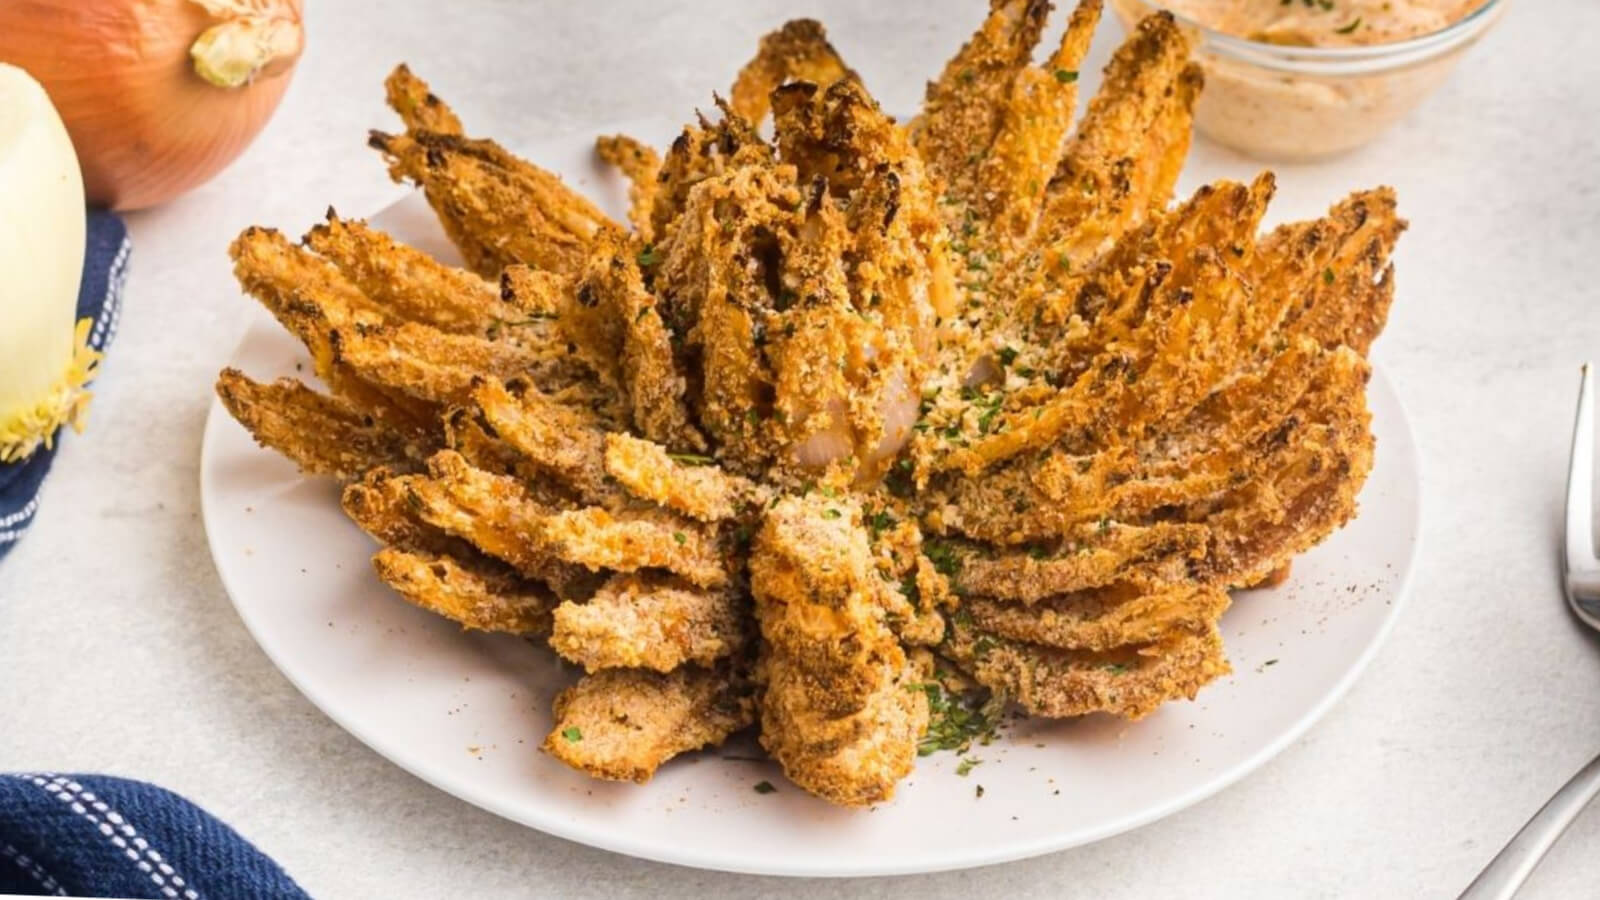 Air fryer bloomin onion on a white plate ready to serve.